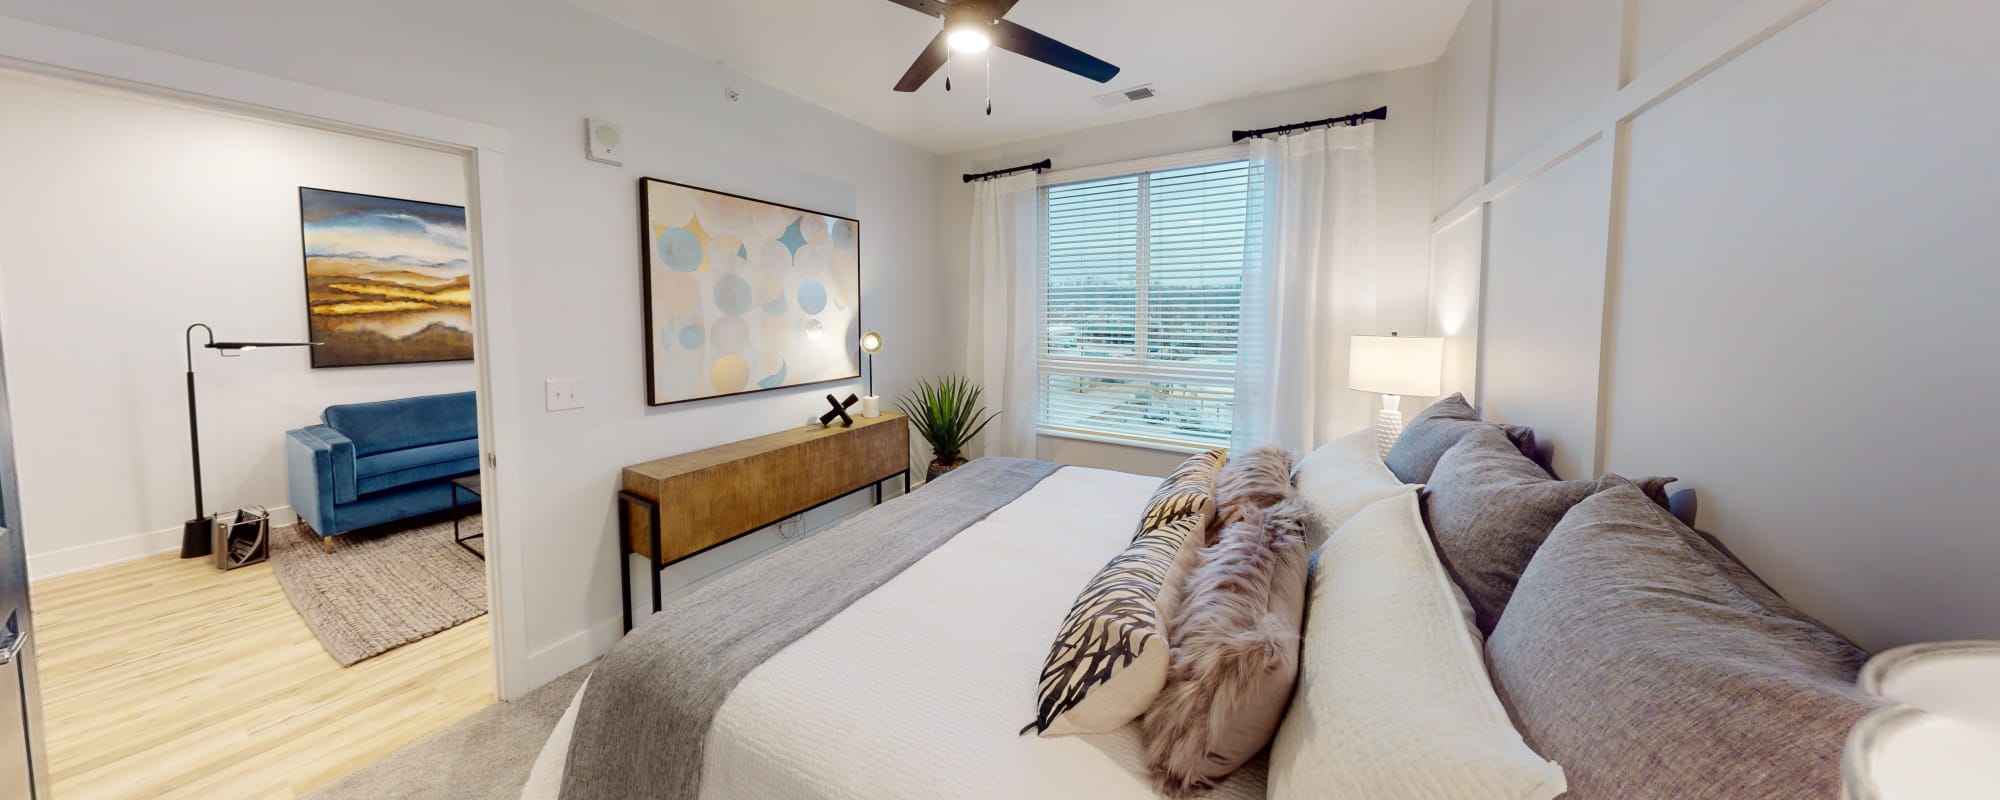 Spacious Bedroom at Factory 52 Apartments | Brand-New Apartments in Norwood, Ohio